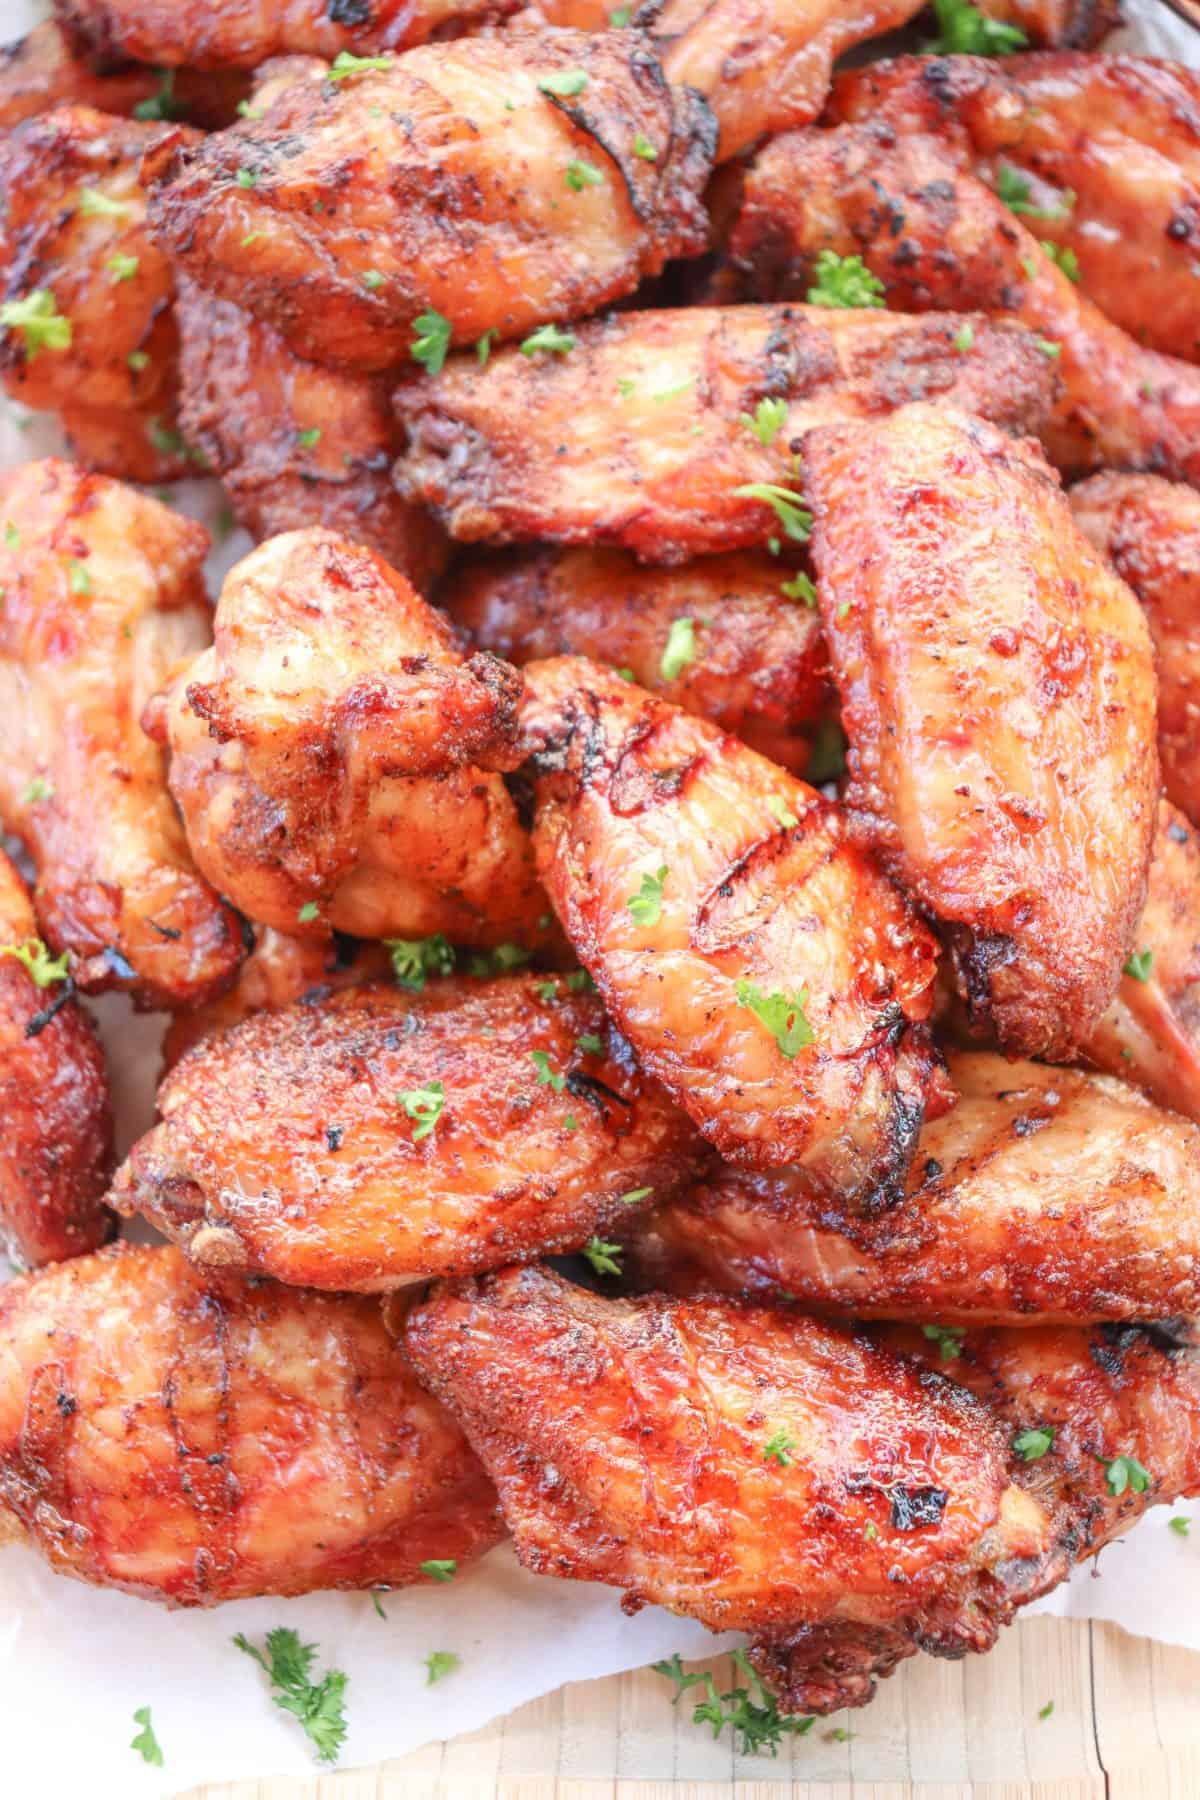 Traeger Grilled Chicken Wings